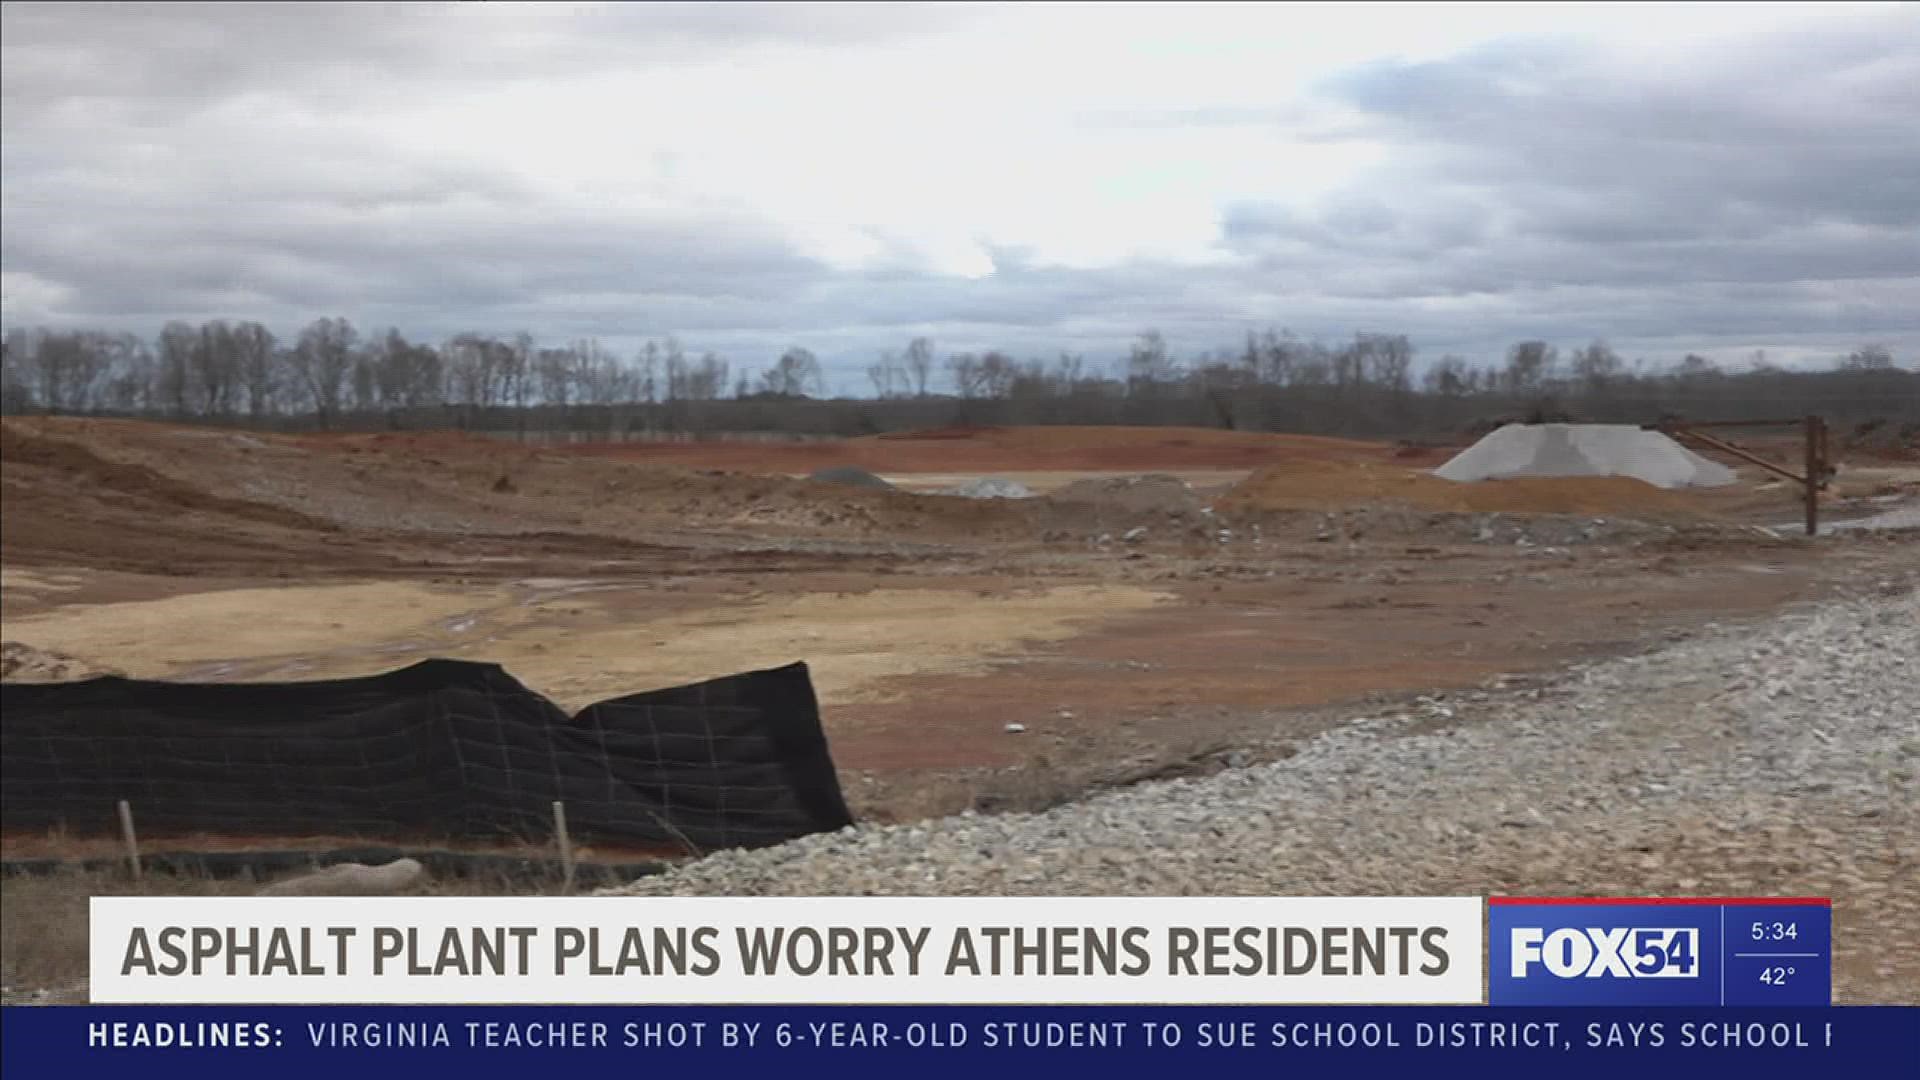 An asphalt plant is coming to Athens which is causing residents to worry how it will affect the area and their loved ones.